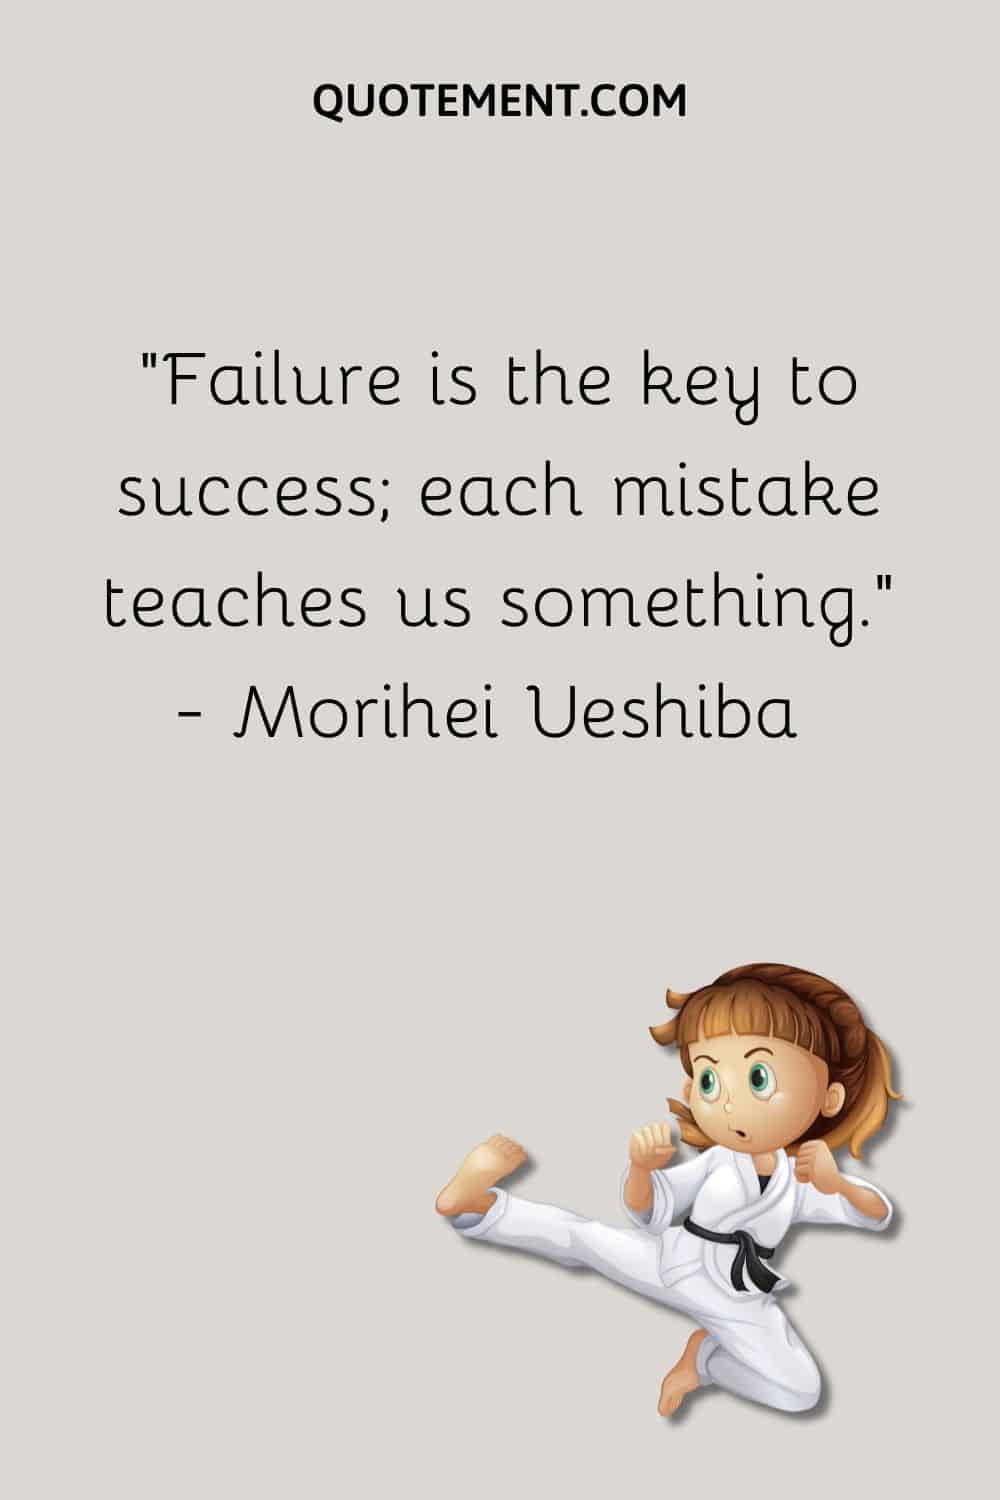 Failure is the key to success; each mistake teaches us something